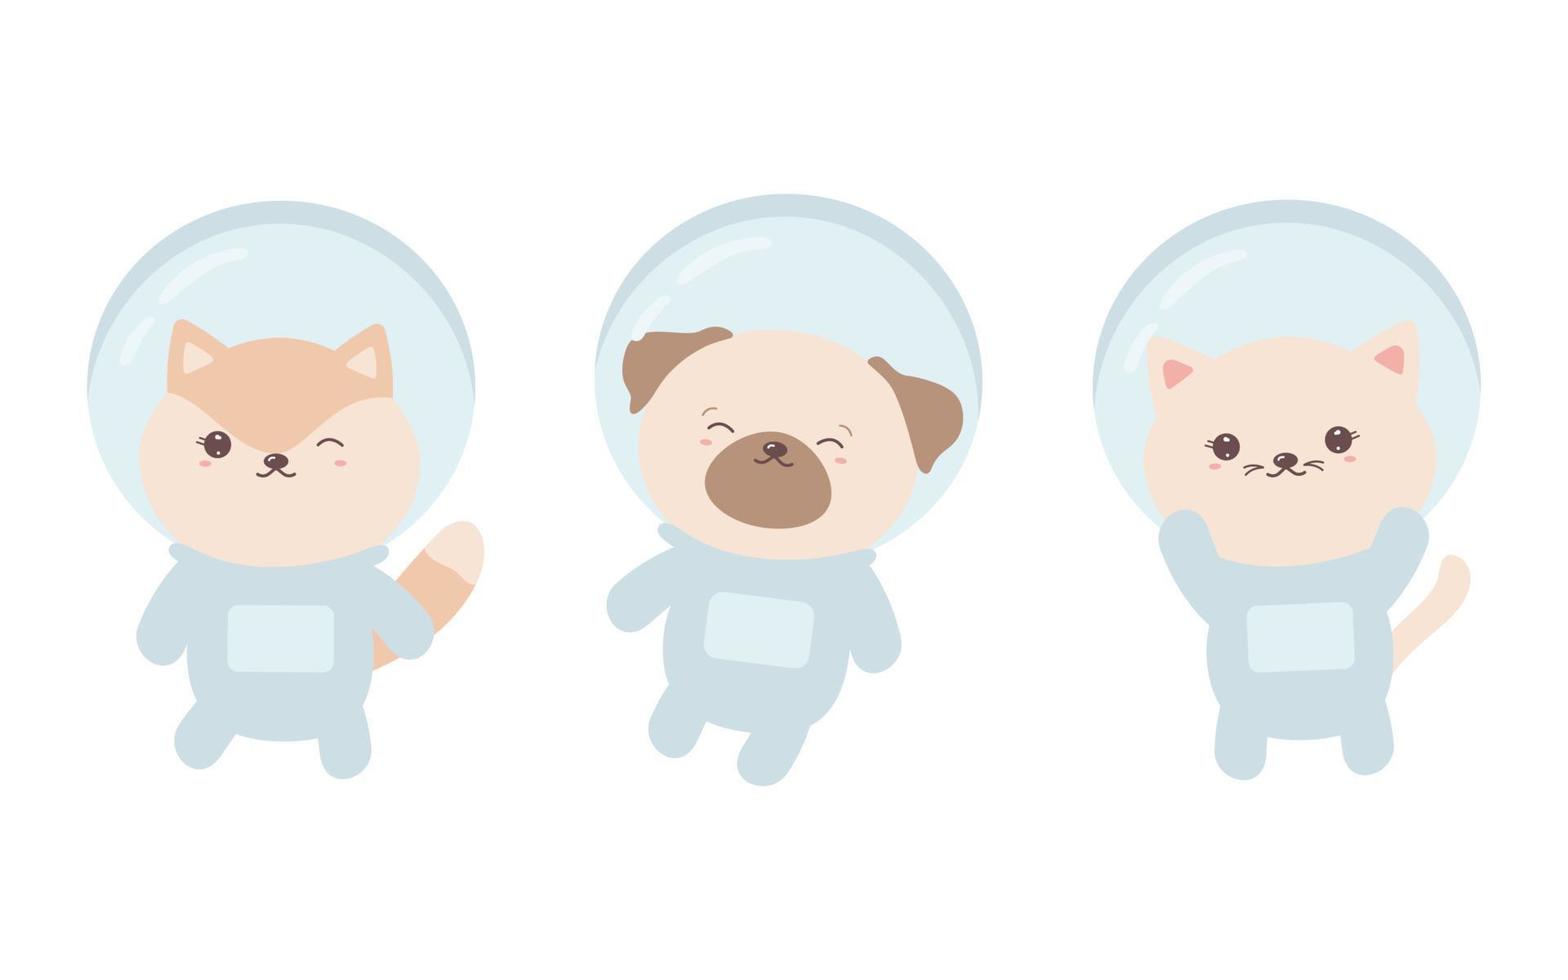 Set of cute kawaii animals astronauts in pastel colors. Funny dog, cat and fox in space suits. Vector Illustration isolated on white background